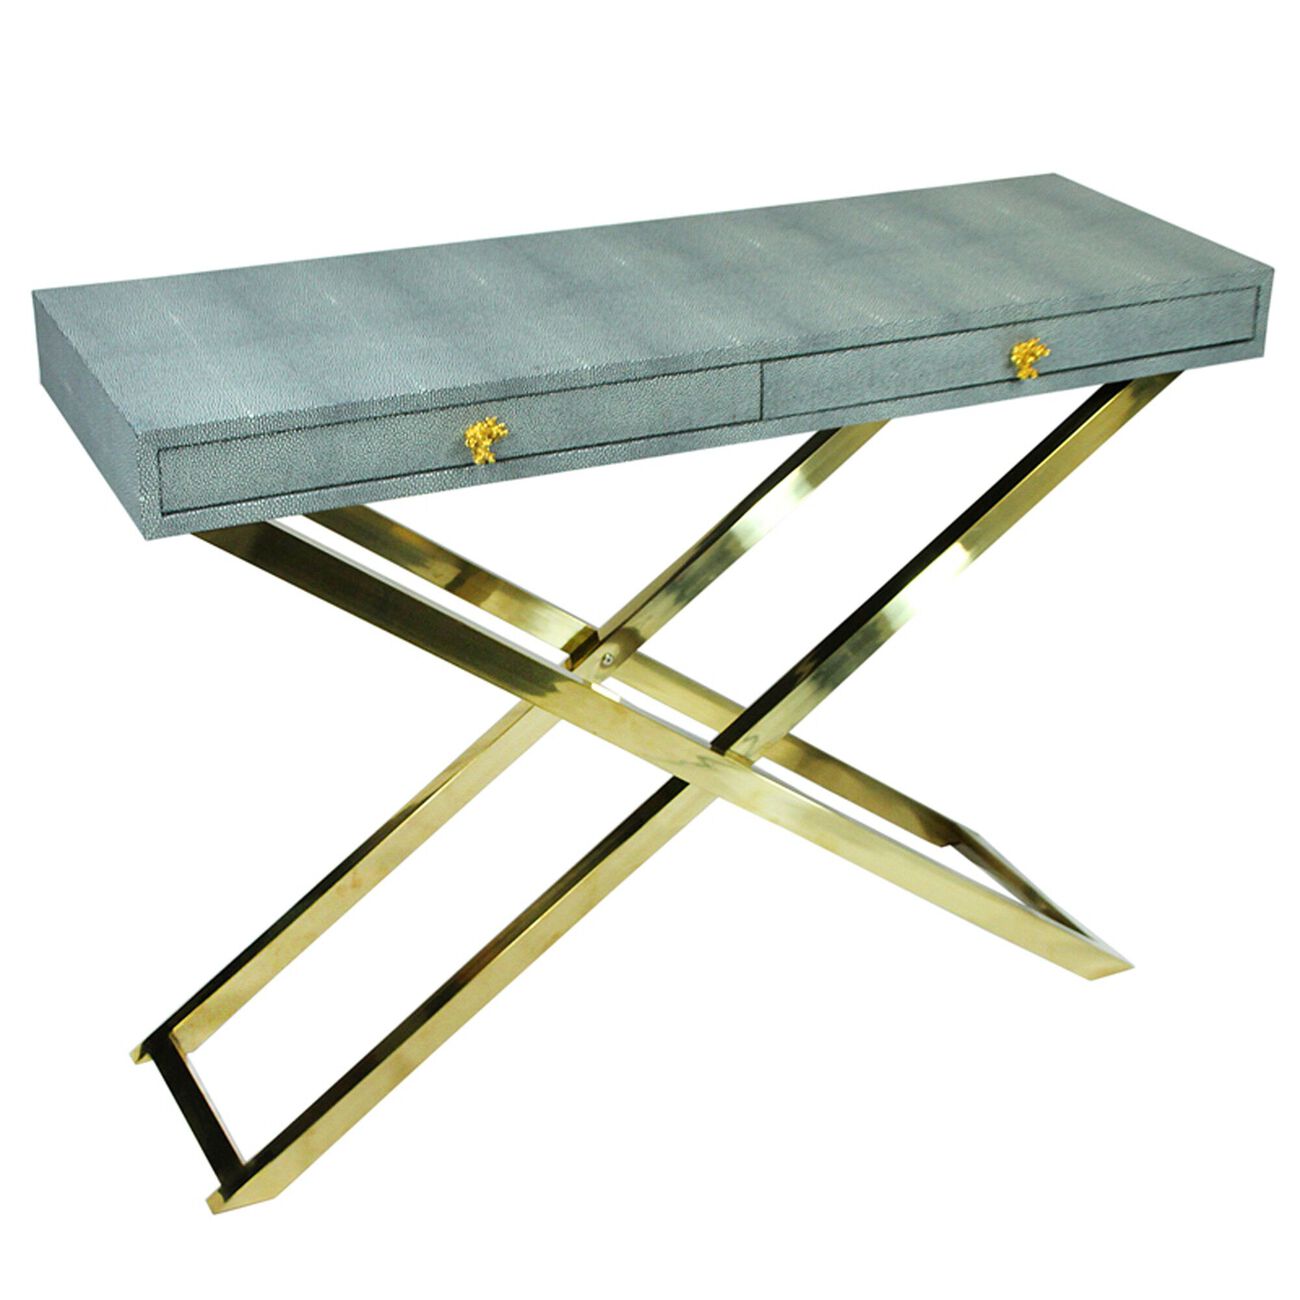 Wood and Metal Folding Console Table with 2 Drawers, Gray and Gold